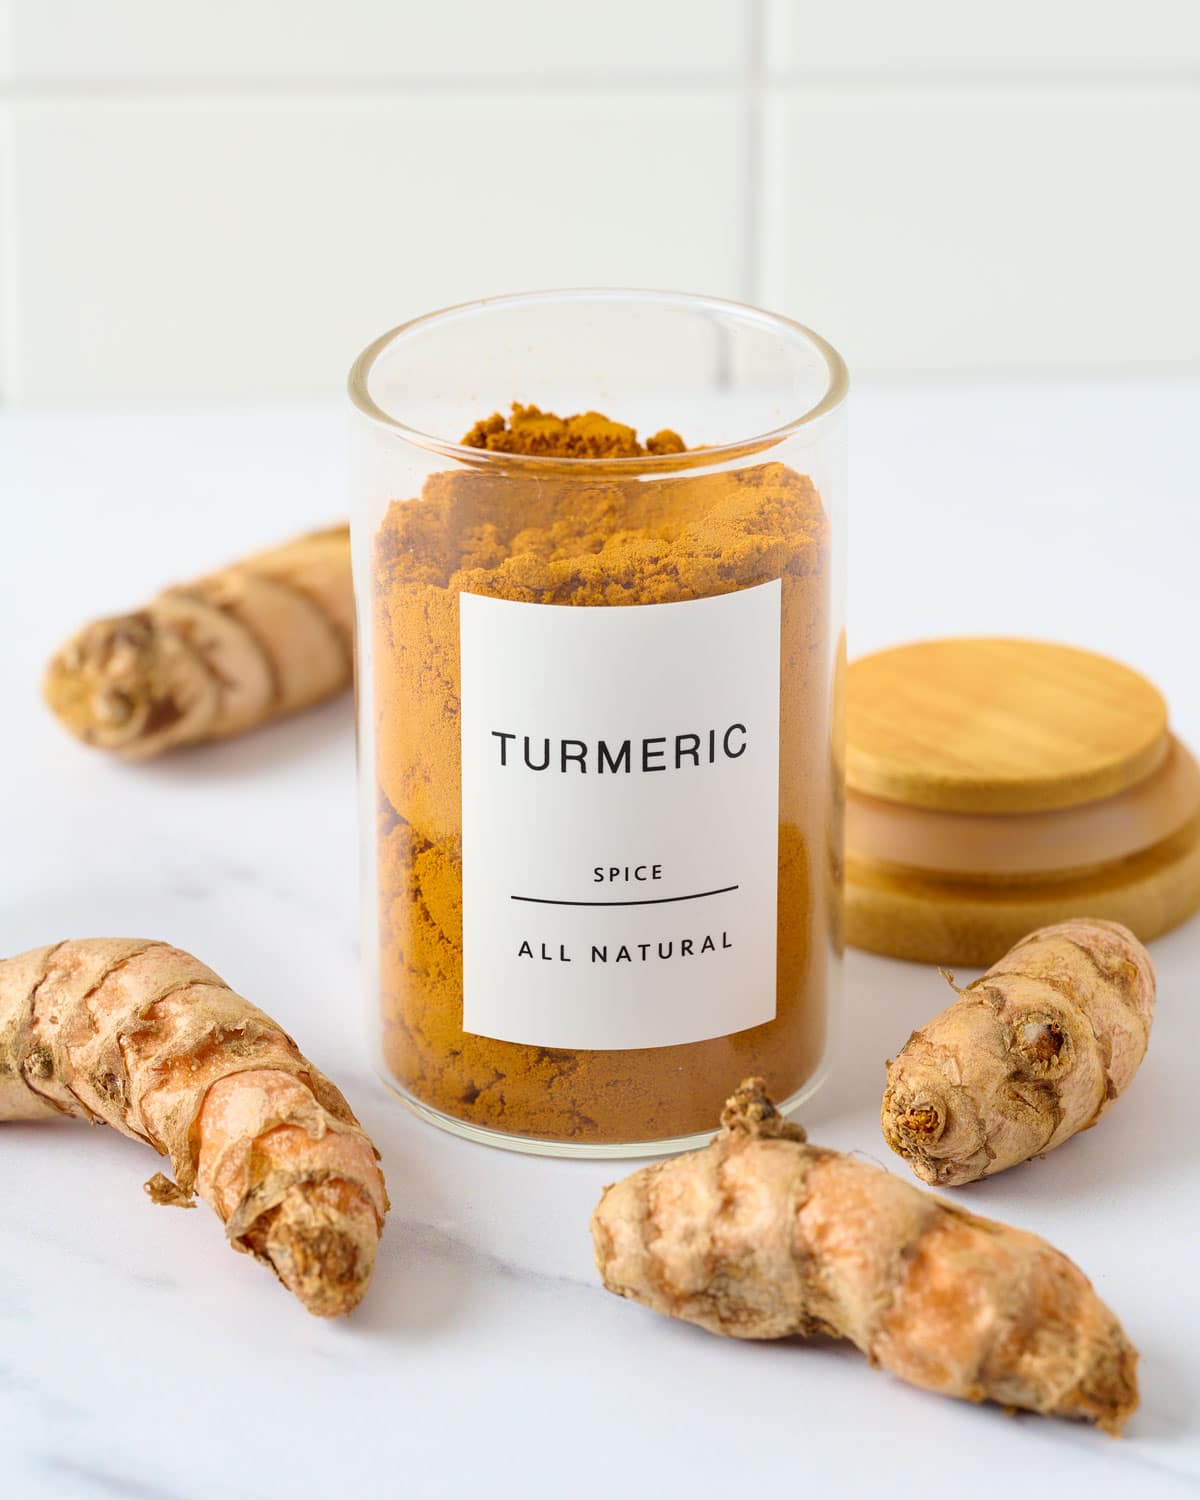 Ground turmeric and whole turmeric on marble.